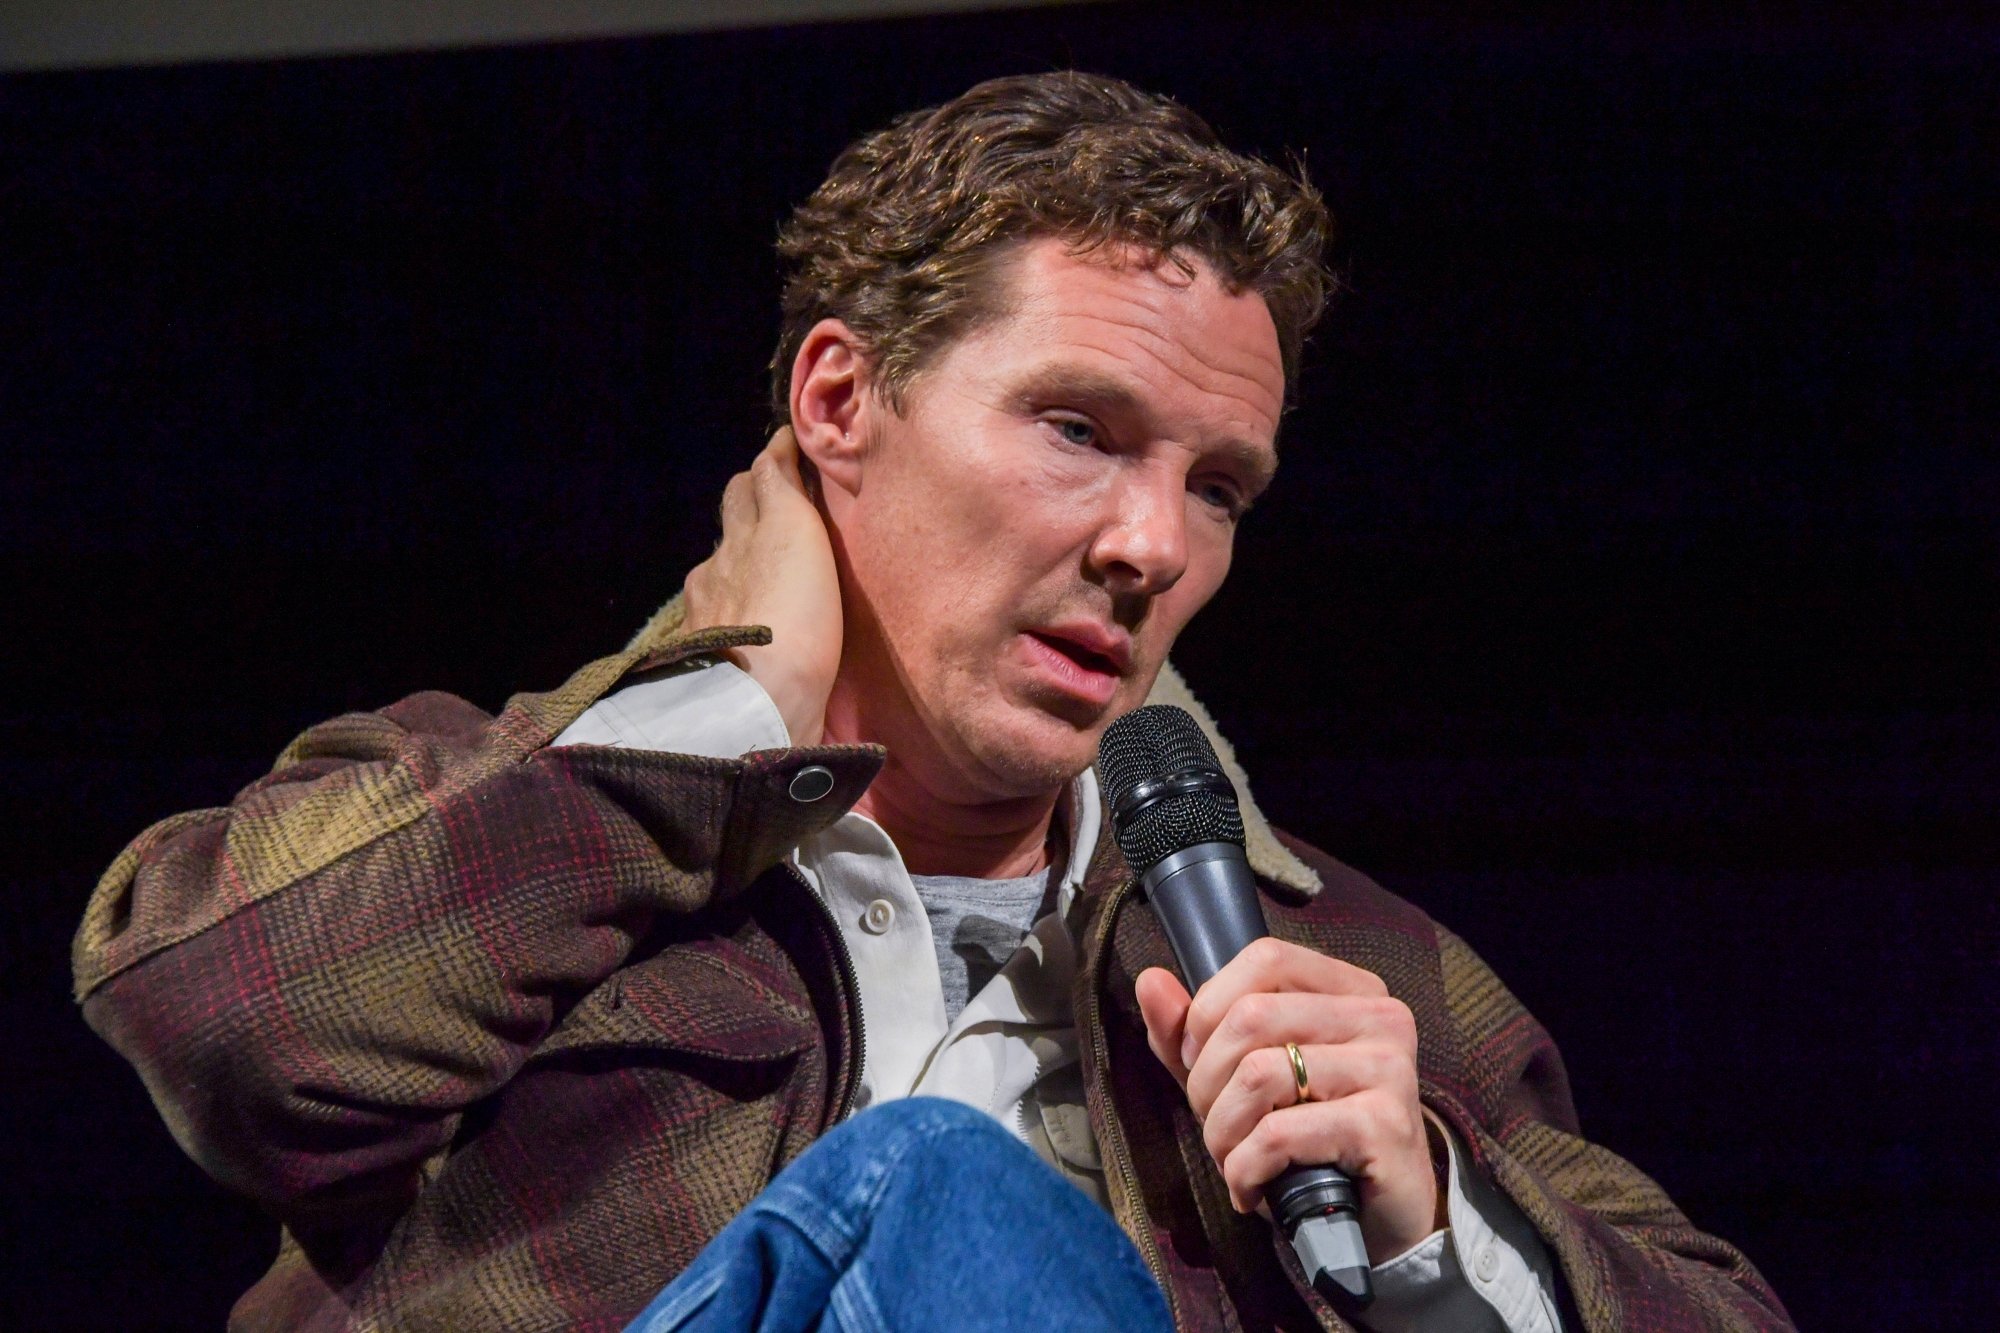 'The Power of the Dog' Phil Burbank actor Benedict Cumberbatch with his hand on his neck and talking into the microphone